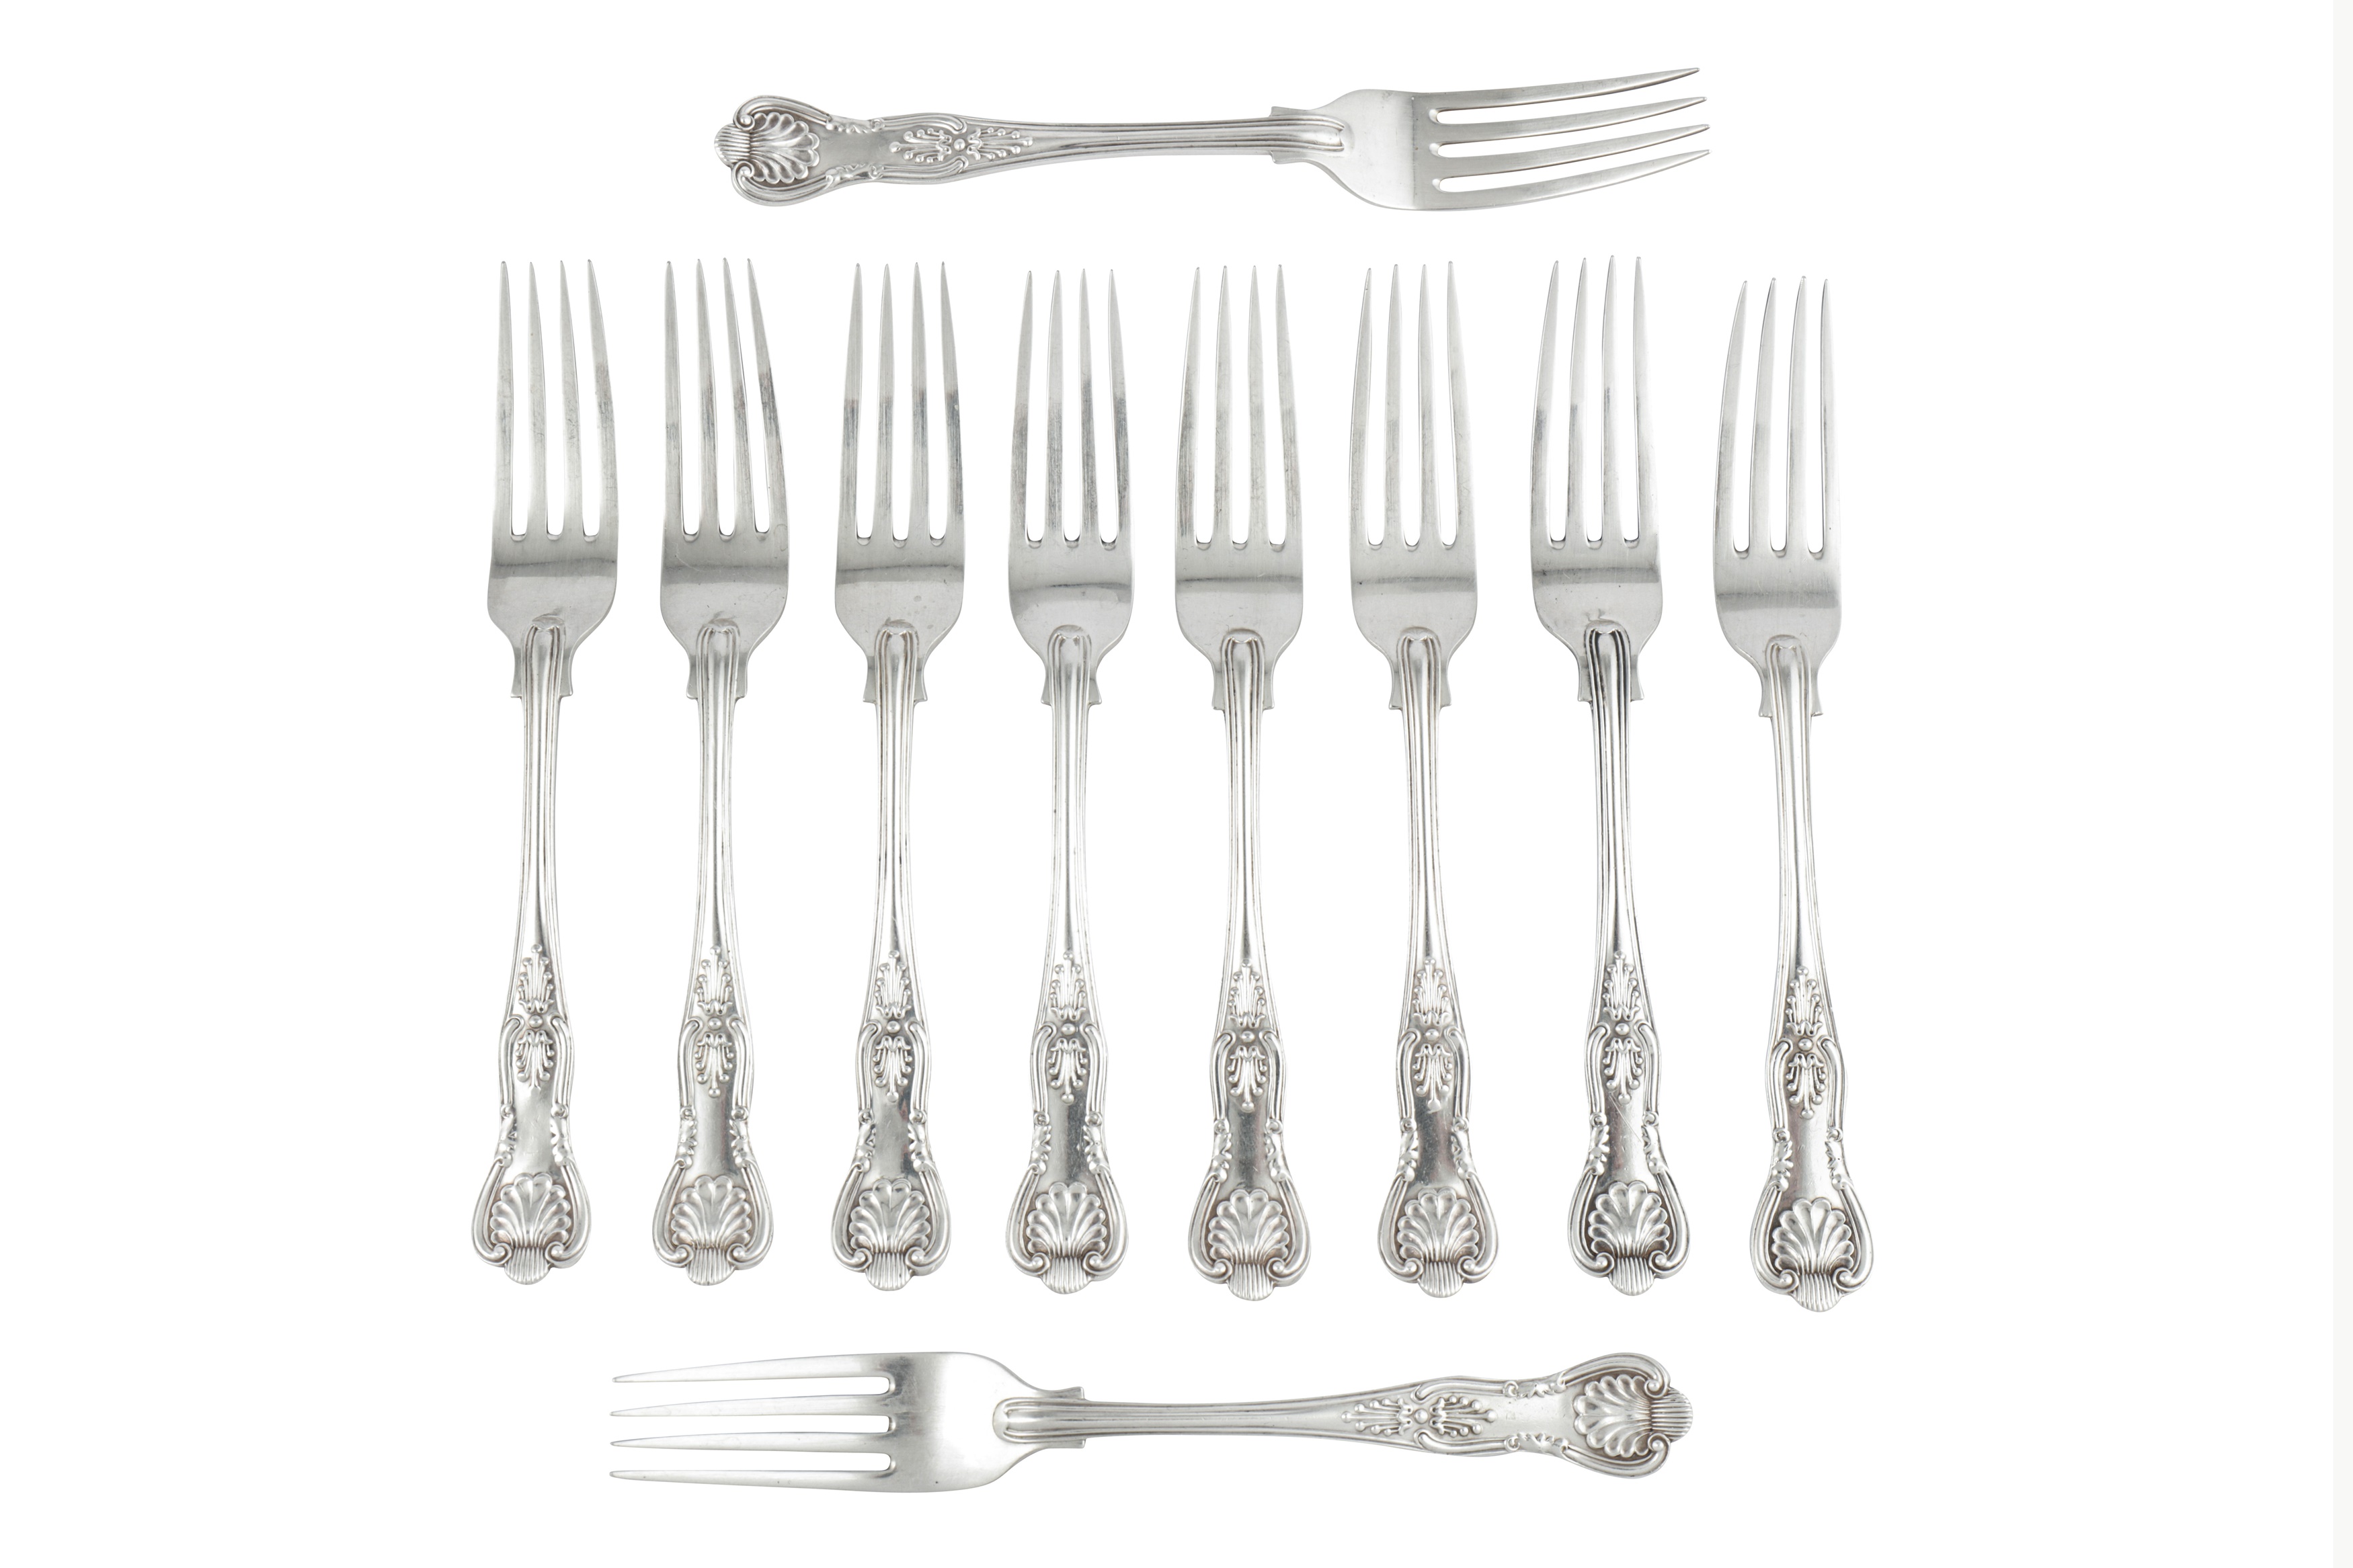 A set of ten George V sterling silver dessert forks, London 1932/33 by Josiah Williams & Co